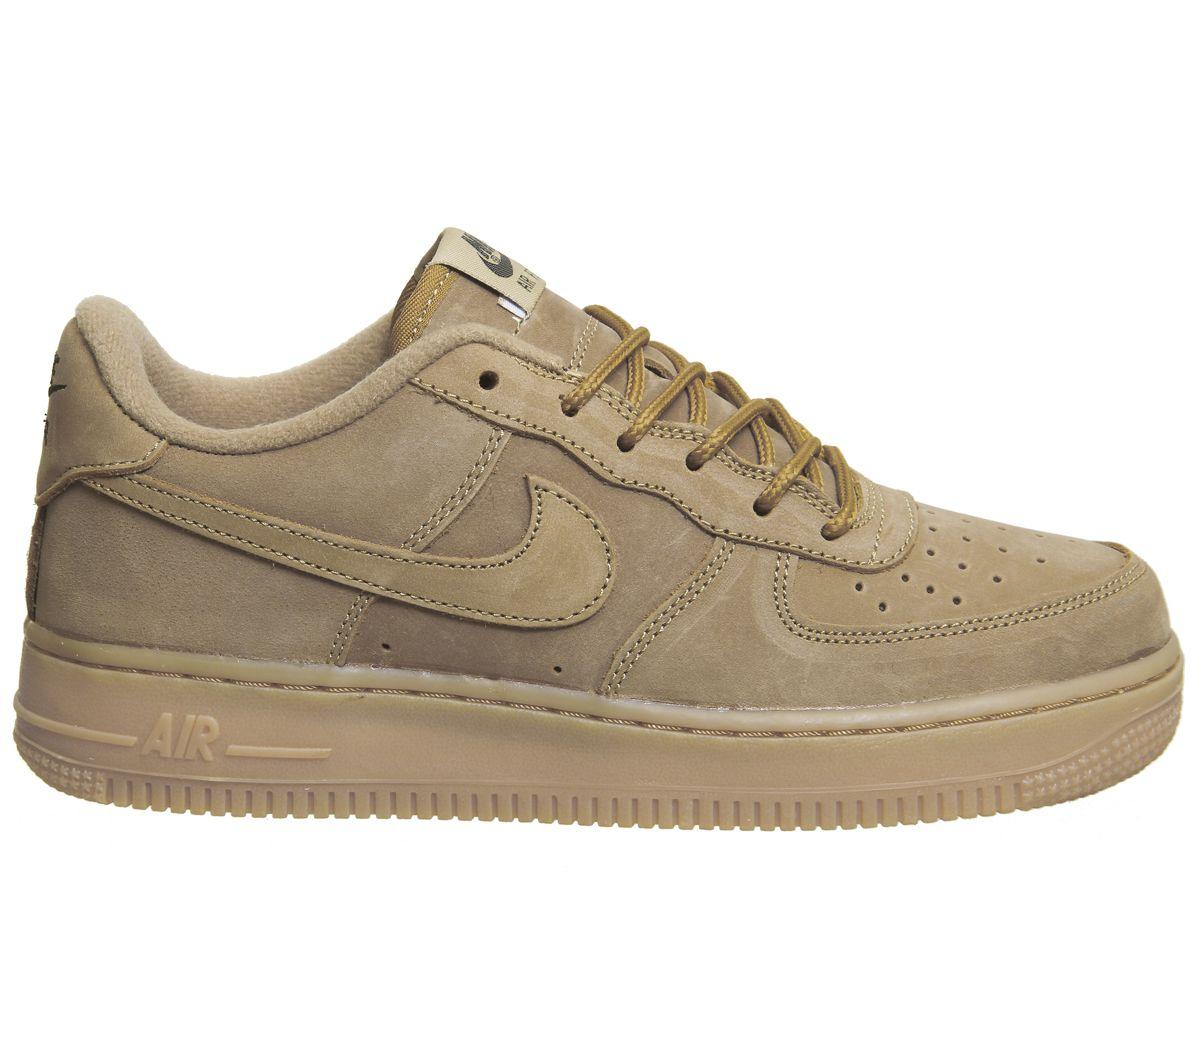 Nike Suede Air Force 1 Trainers in Brown - Lyst